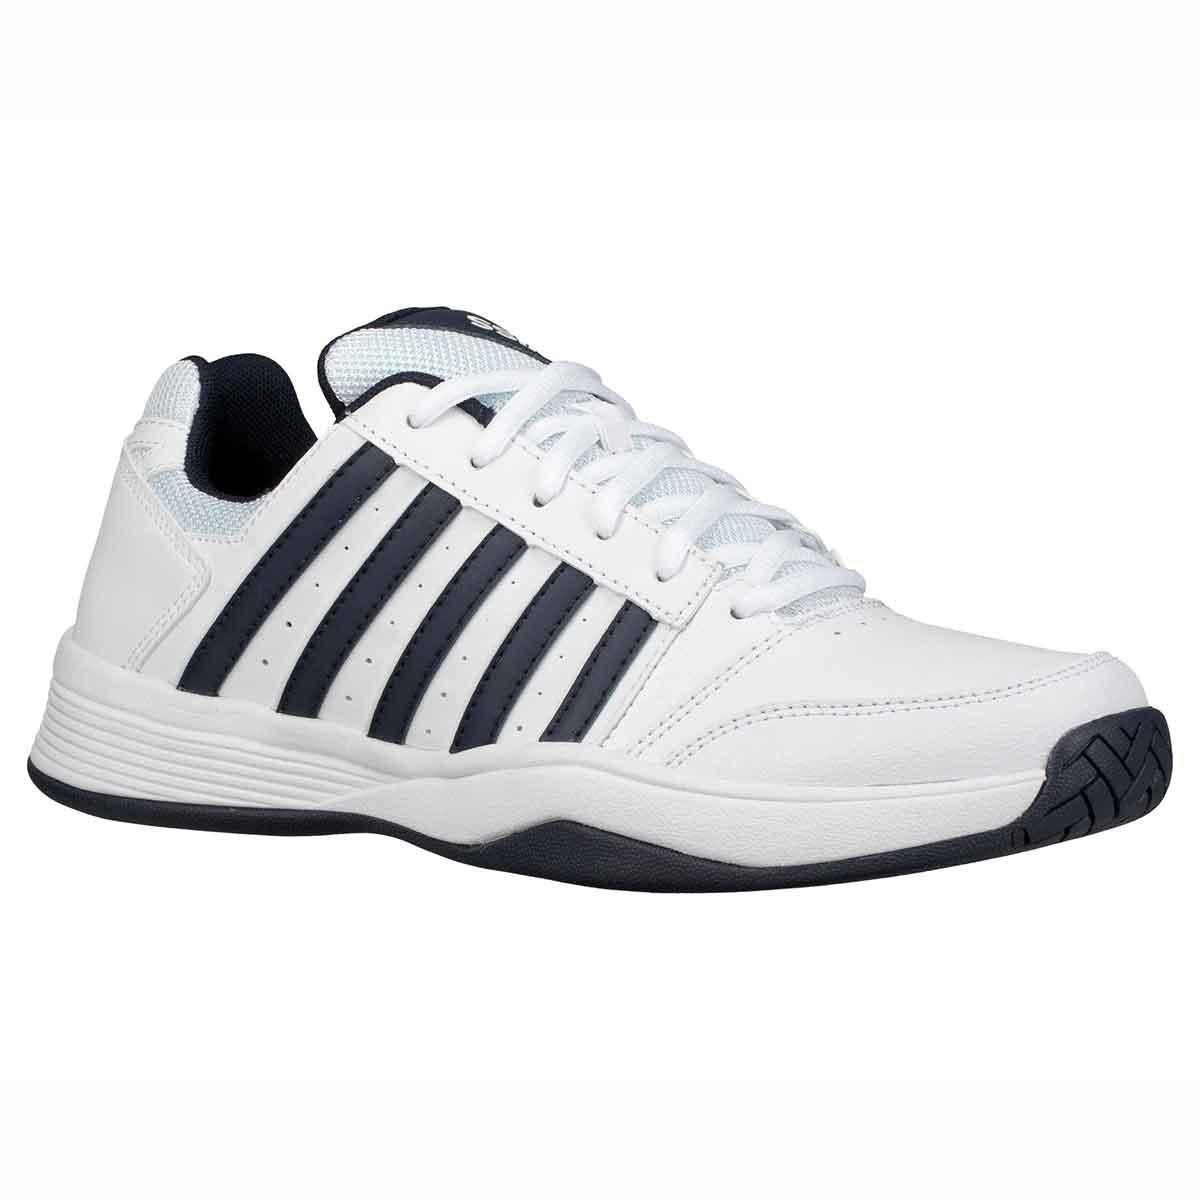 K-Swiss Court Smash Mens White Tennis Shoes Trainers Size 8.5-12 